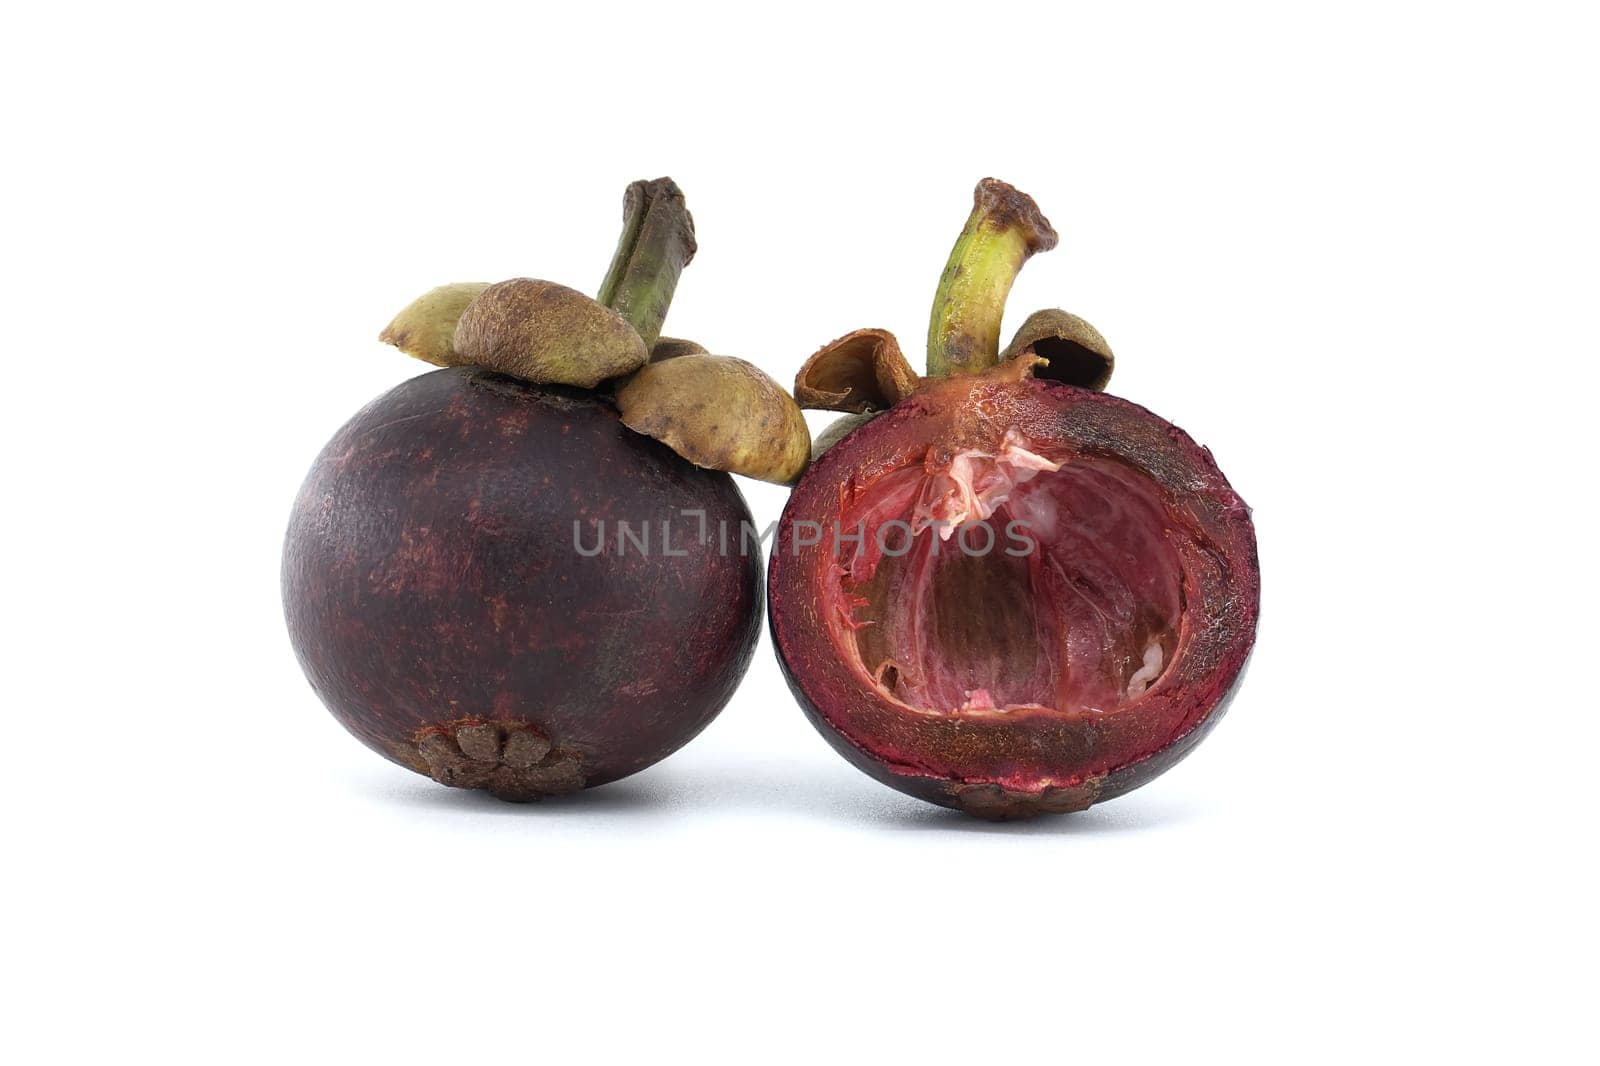 Purple mangosteen fruits isolated against a white background by NetPix